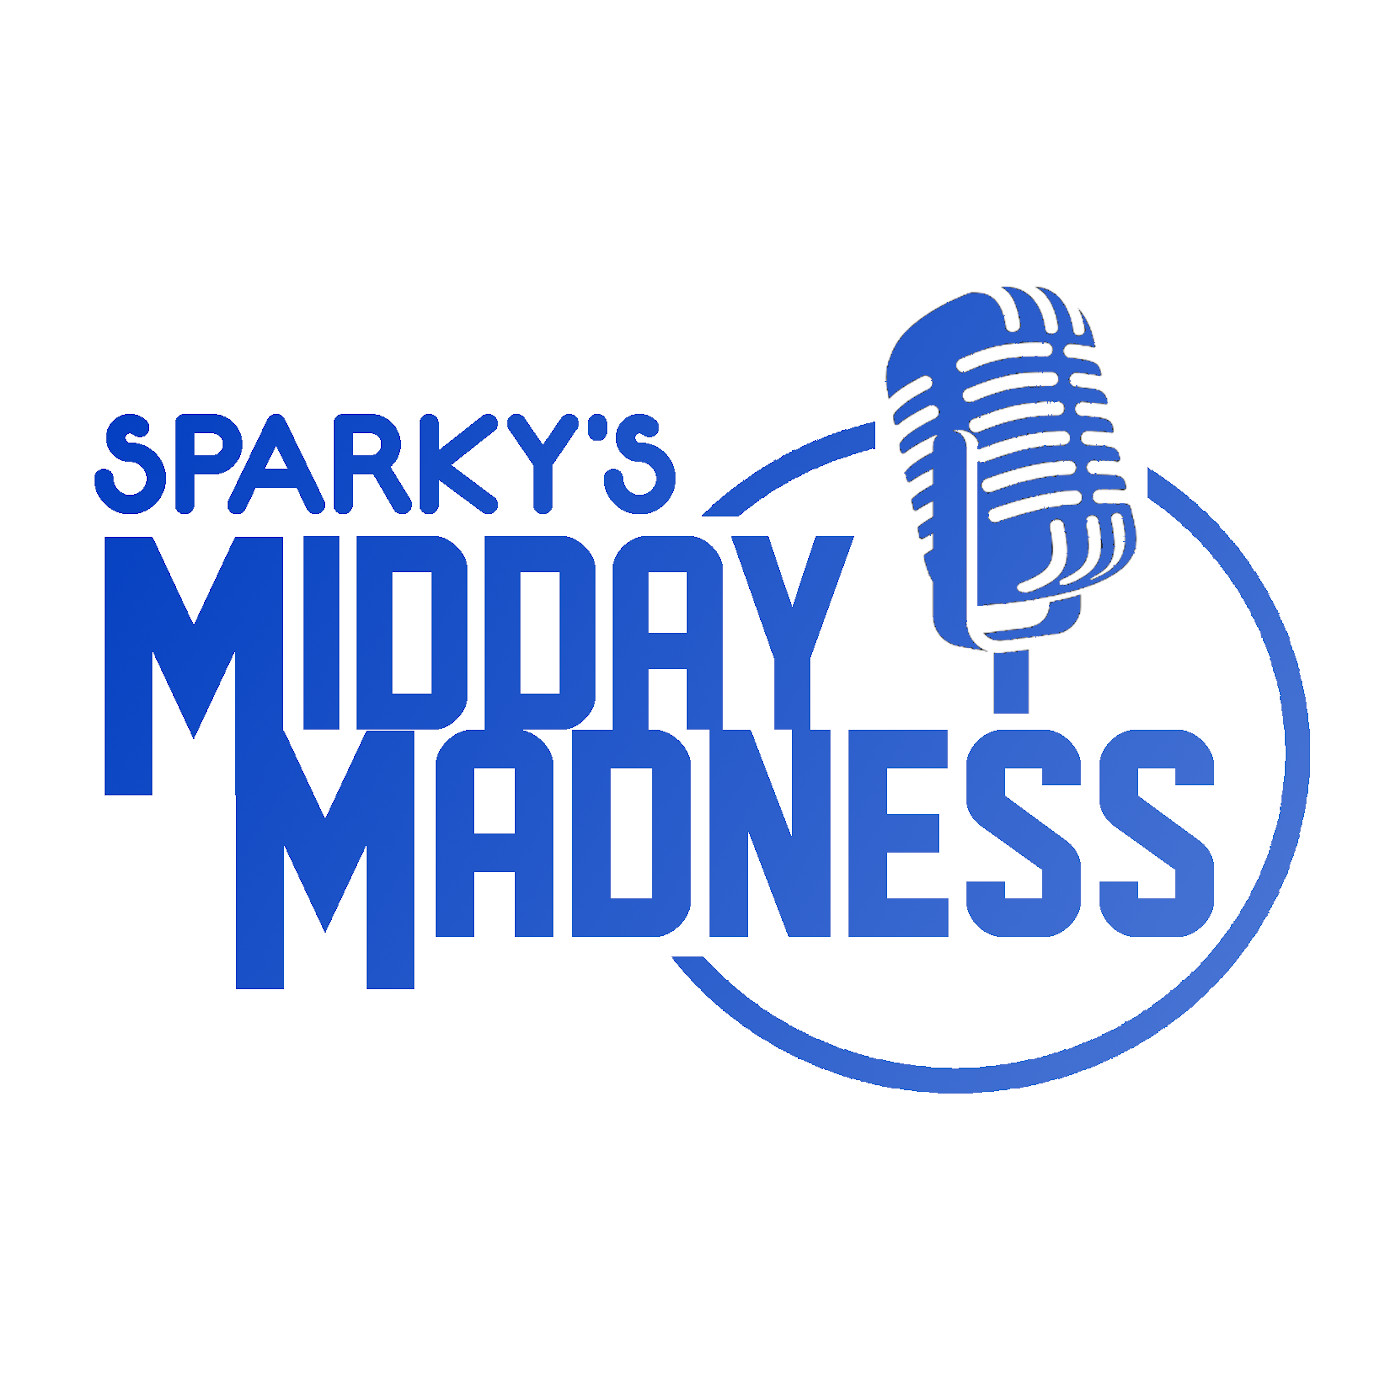 05/05/21 Sparky's Midday Madness - Let's learn about Amari Rodgers!